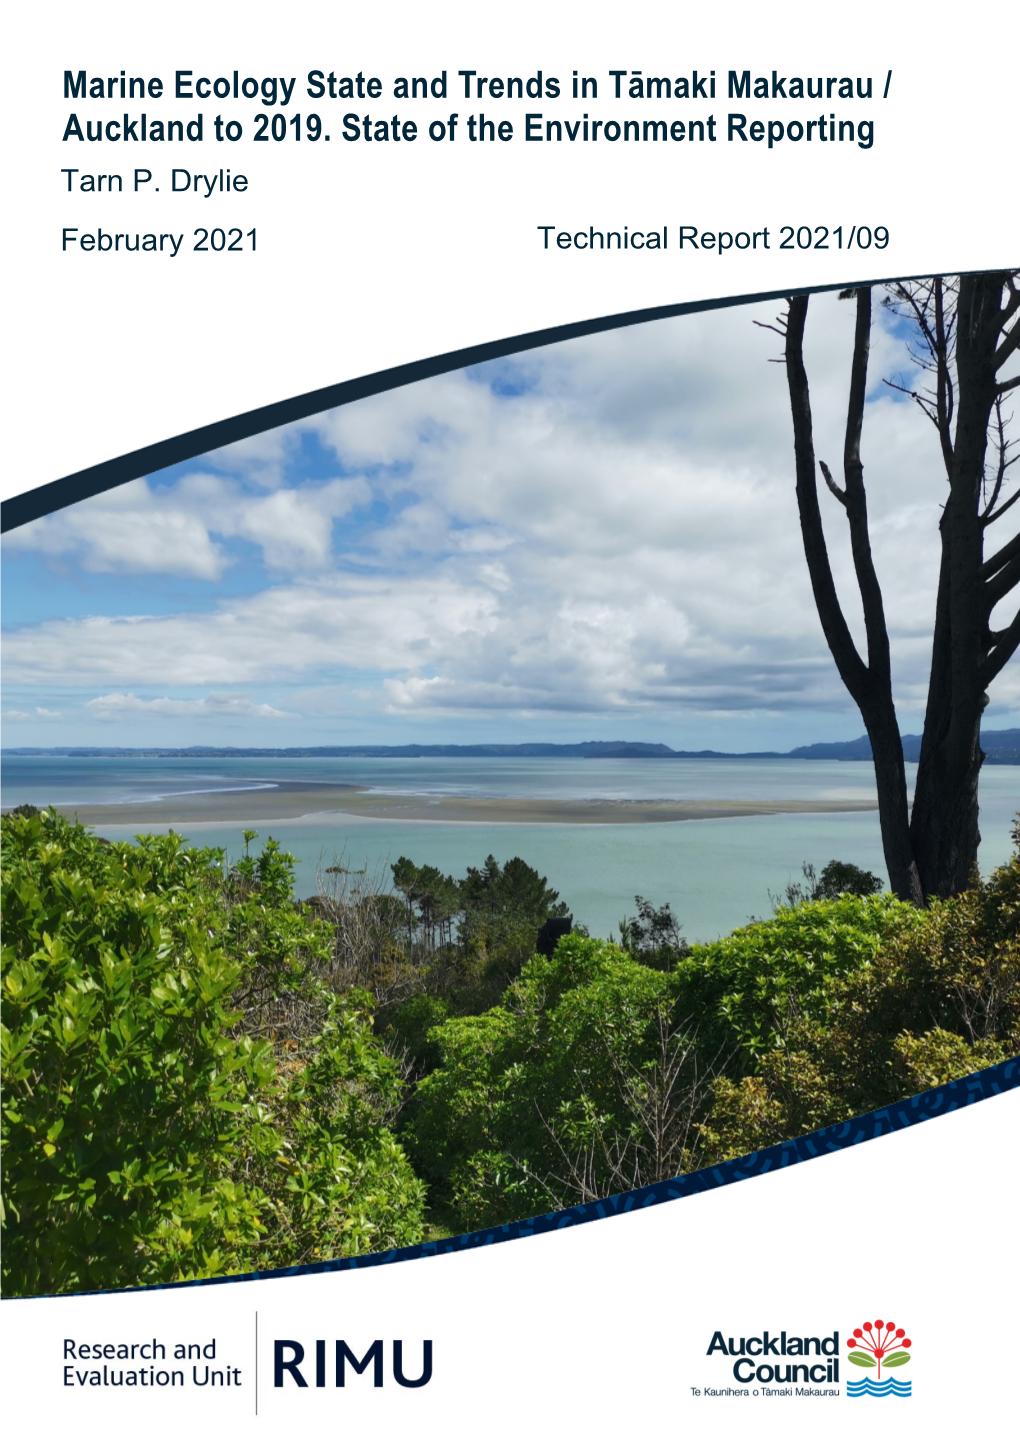 Marine Ecology State and Trends in Tāmaki Makaurau / Auckland to 2019